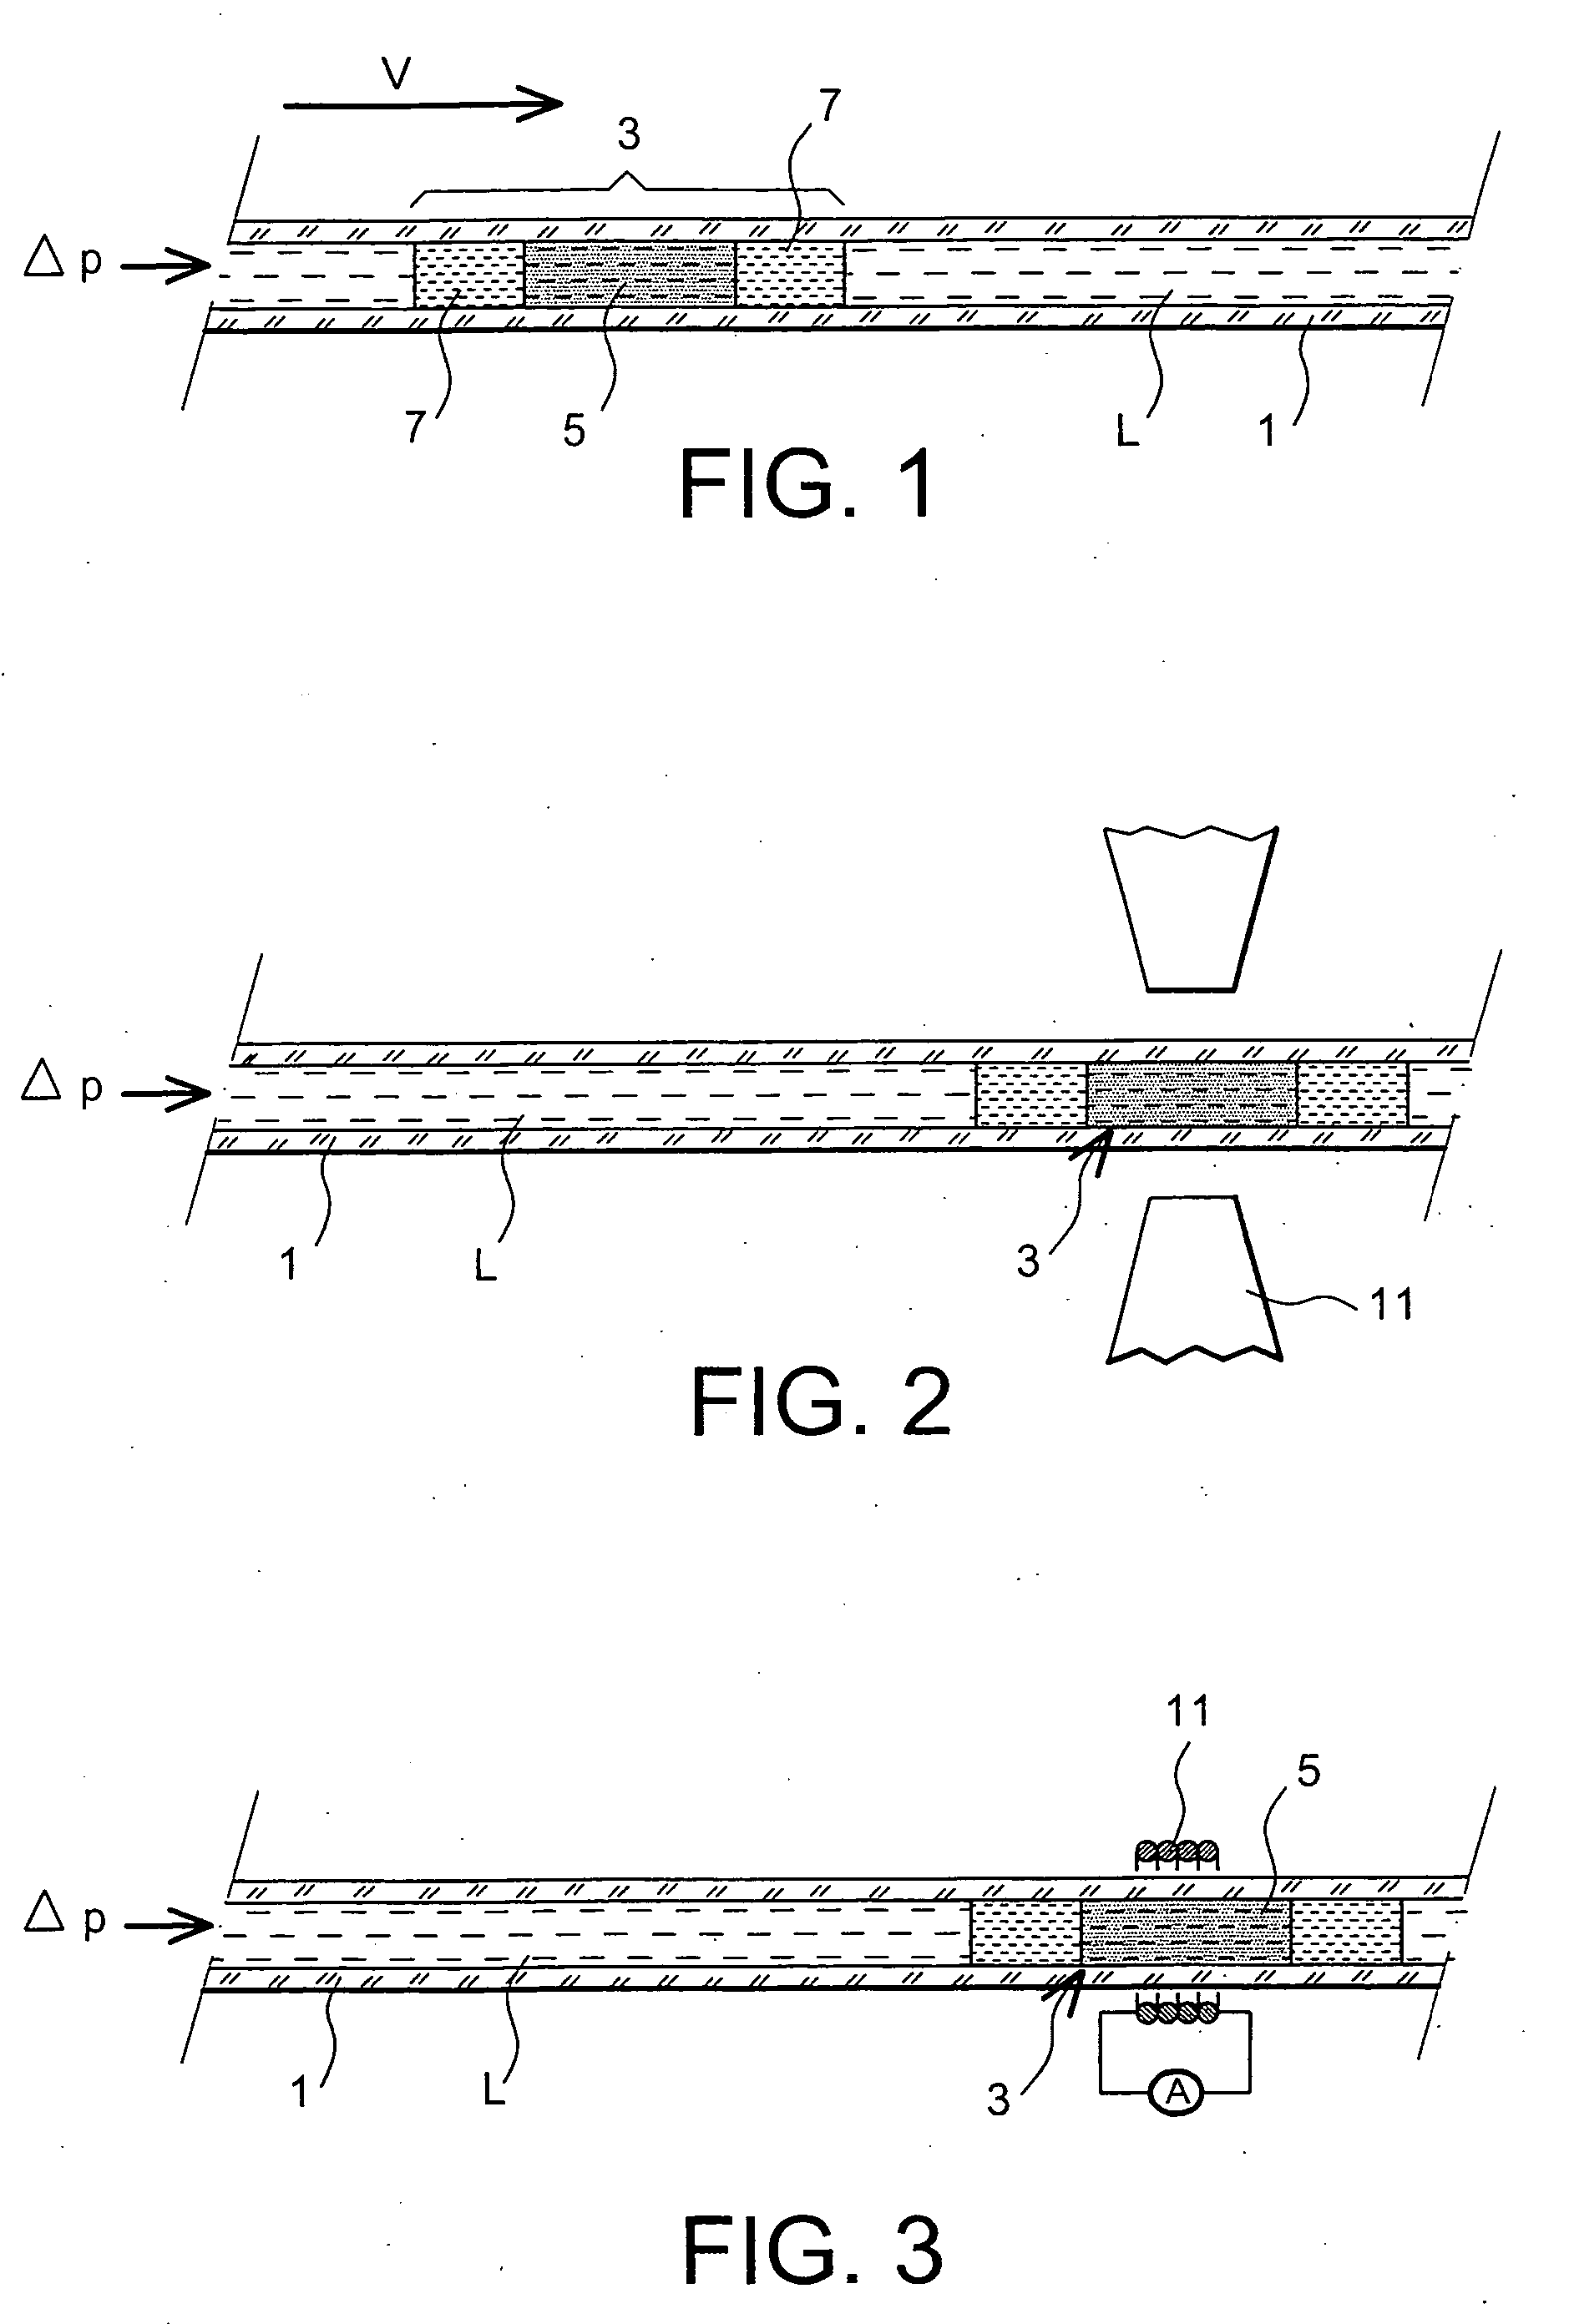 Method for moving a fluid of interest in a capillary tube and fluidic microsystem